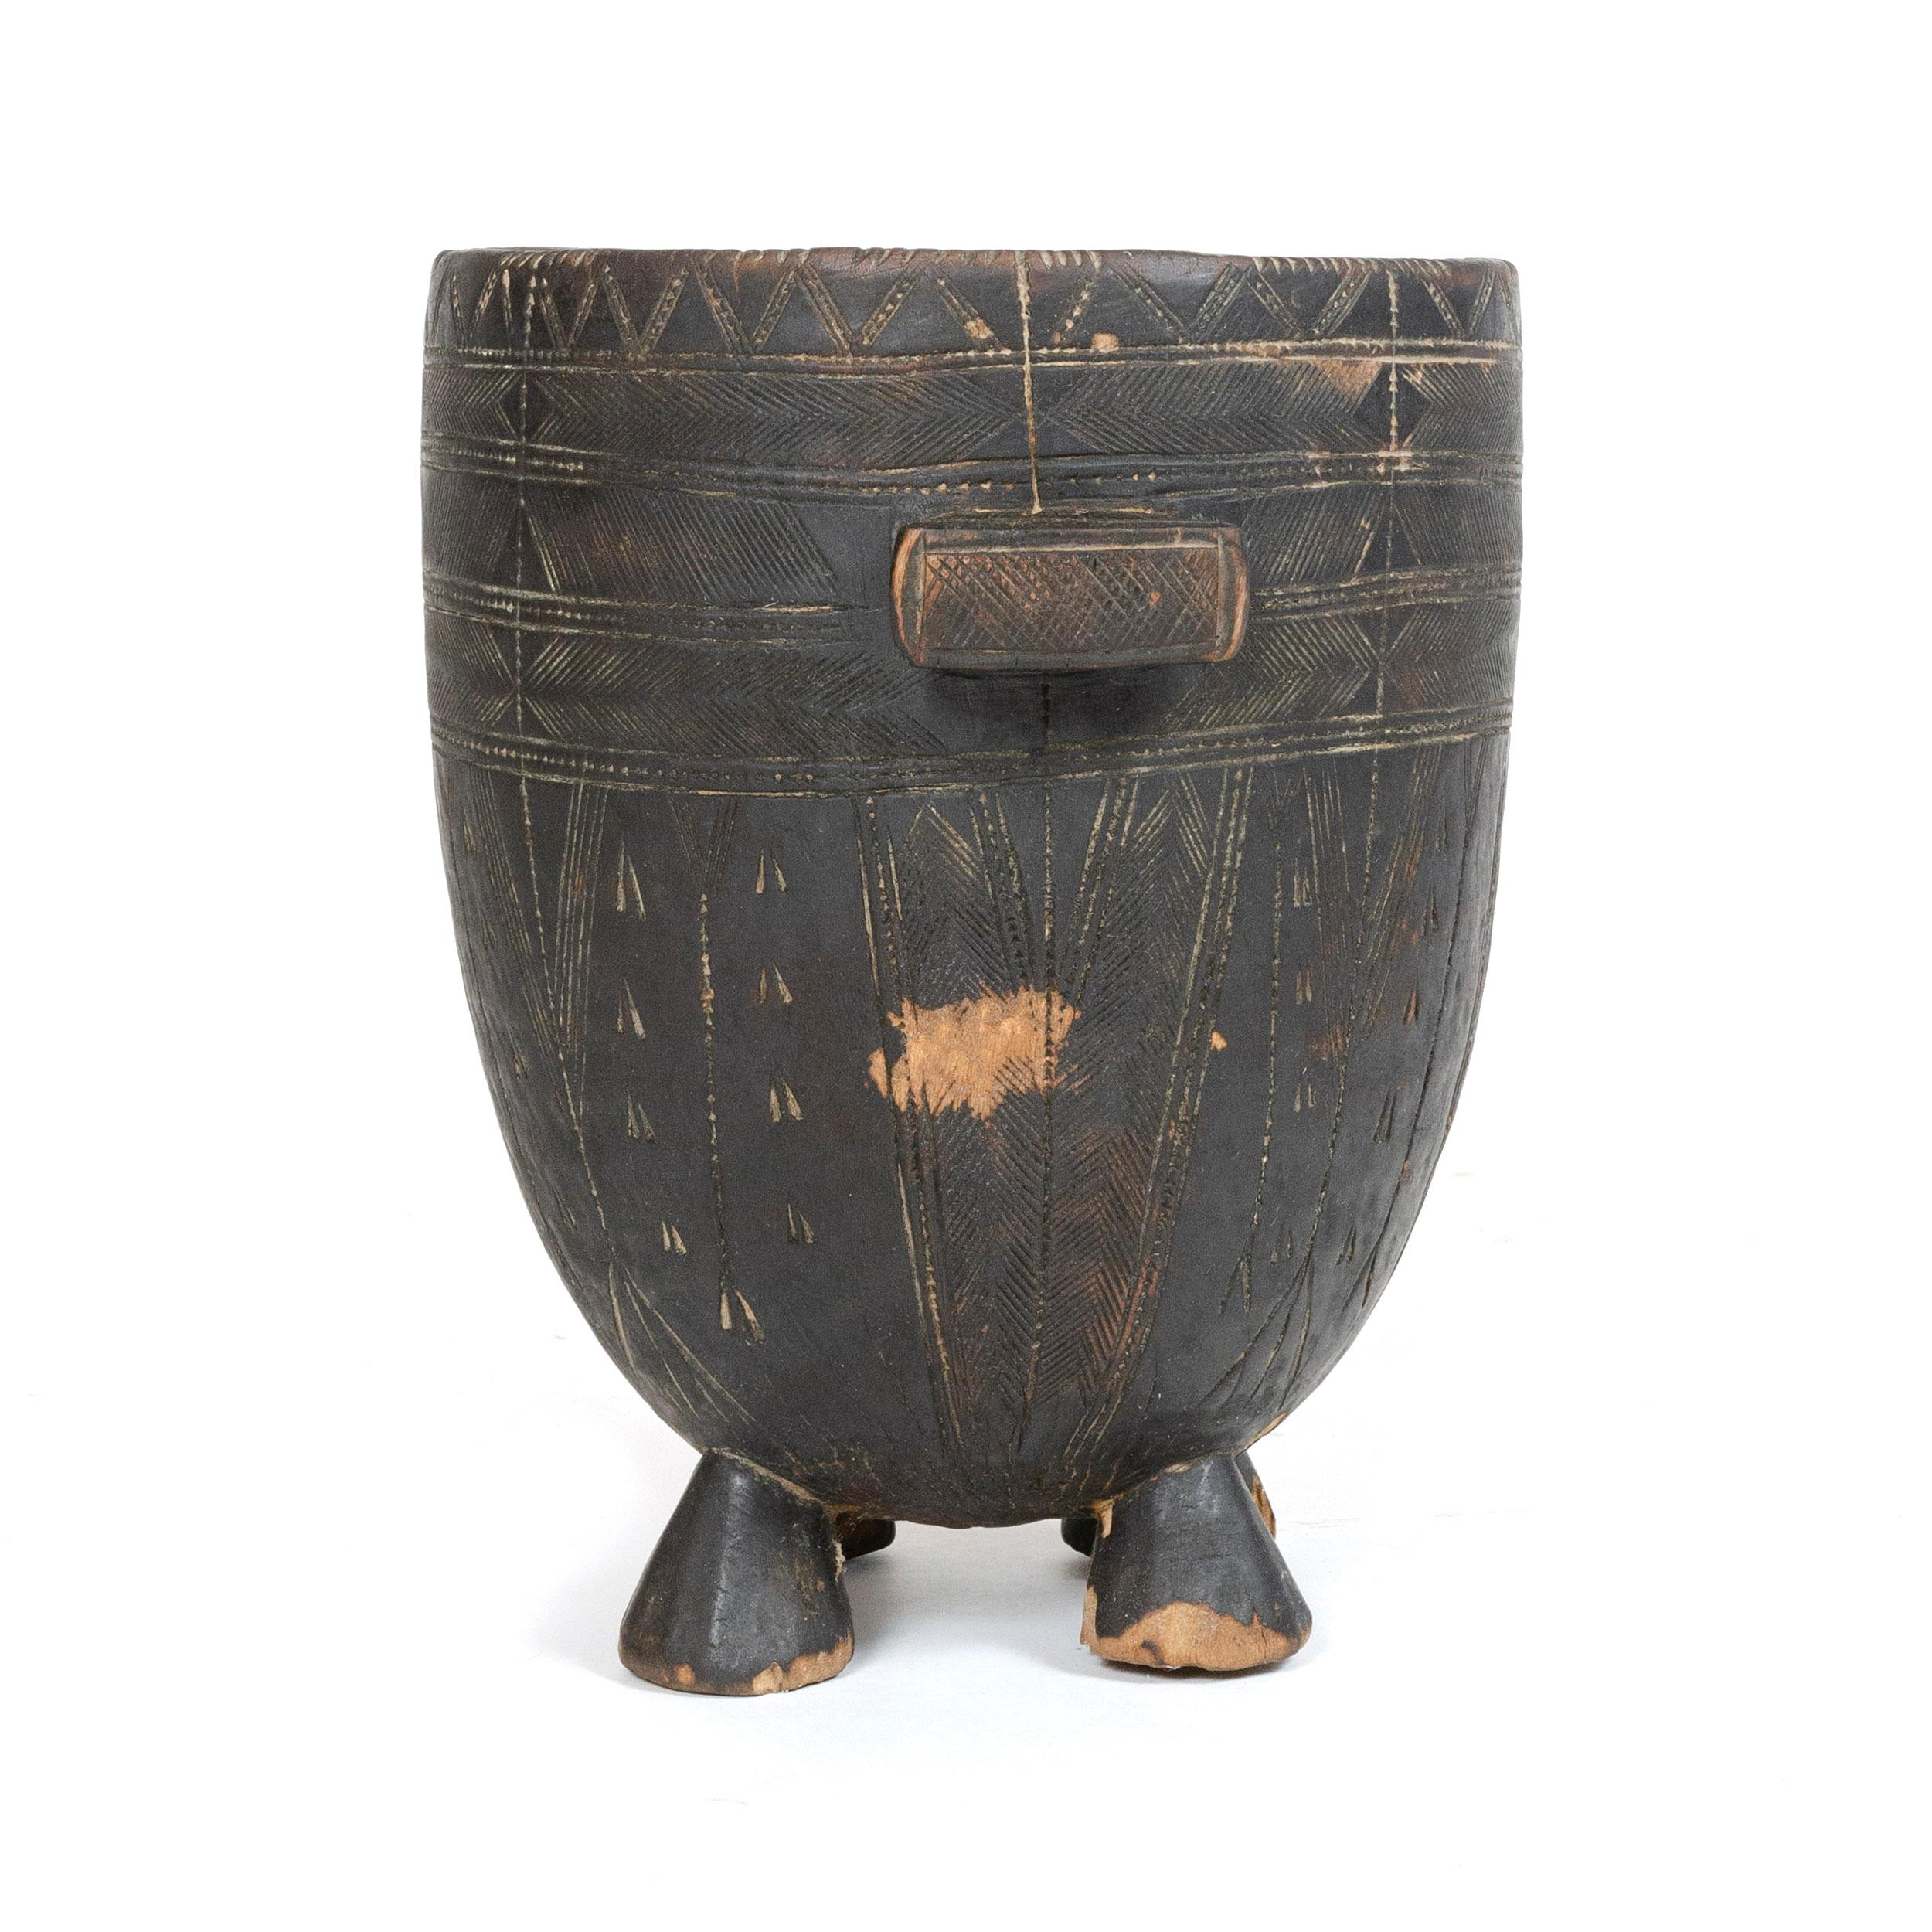 A robust vessel with a single handle on four legs, carved from one continuous piece of wood.